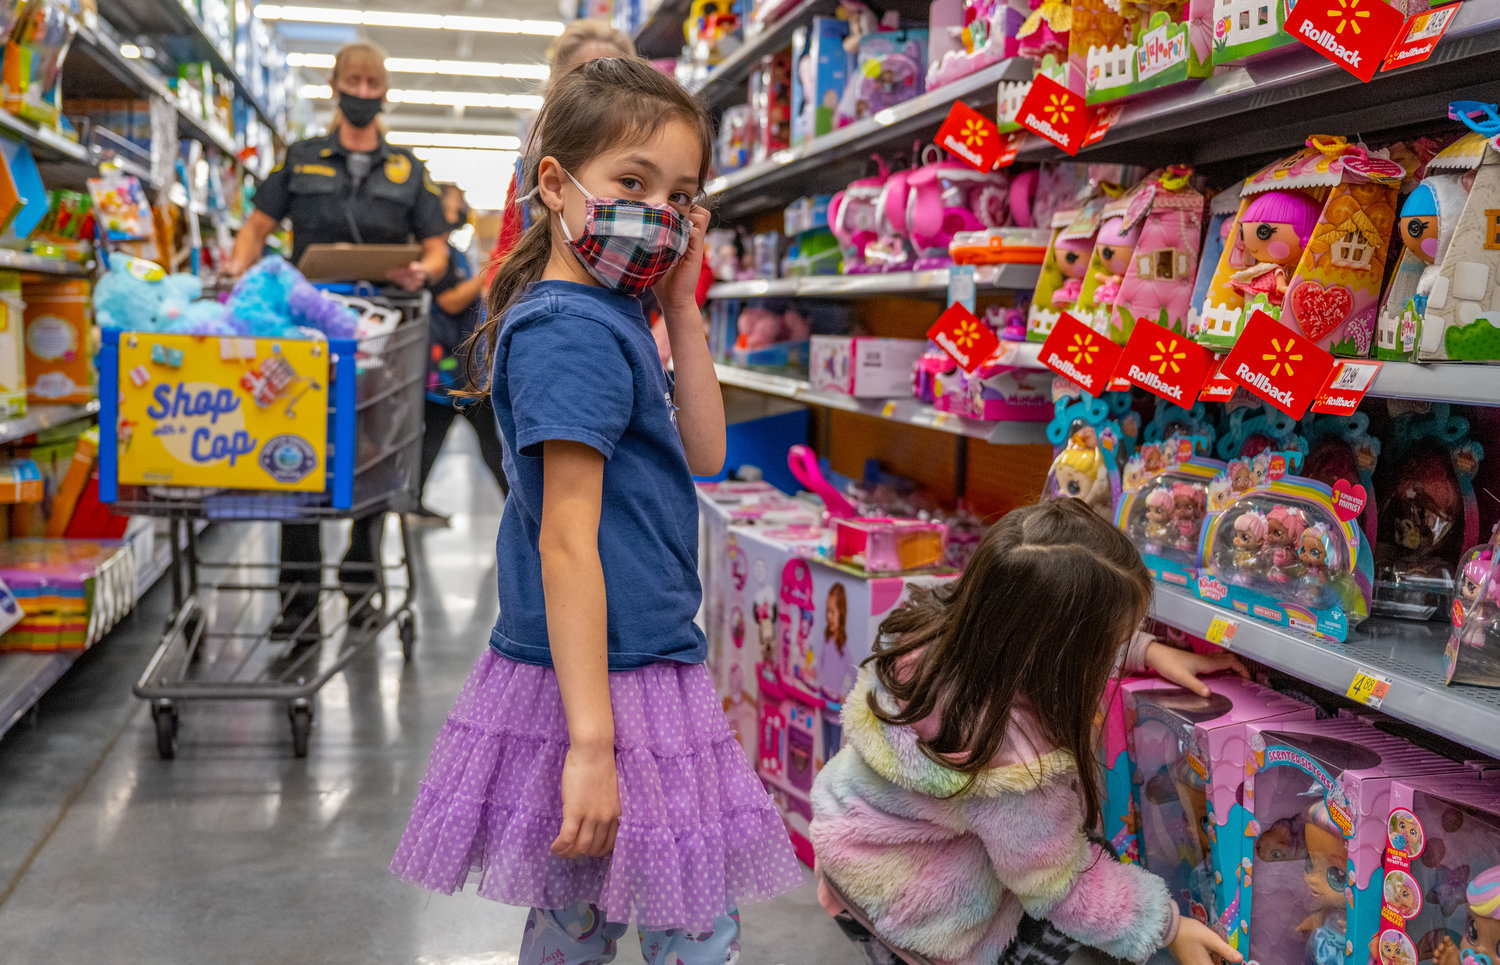 Officers from the Battle Ground Police Officers spent the morning of Dec. 4 helping 19 area kids shop for Christmas presents during the annual Shop with a Cop program.